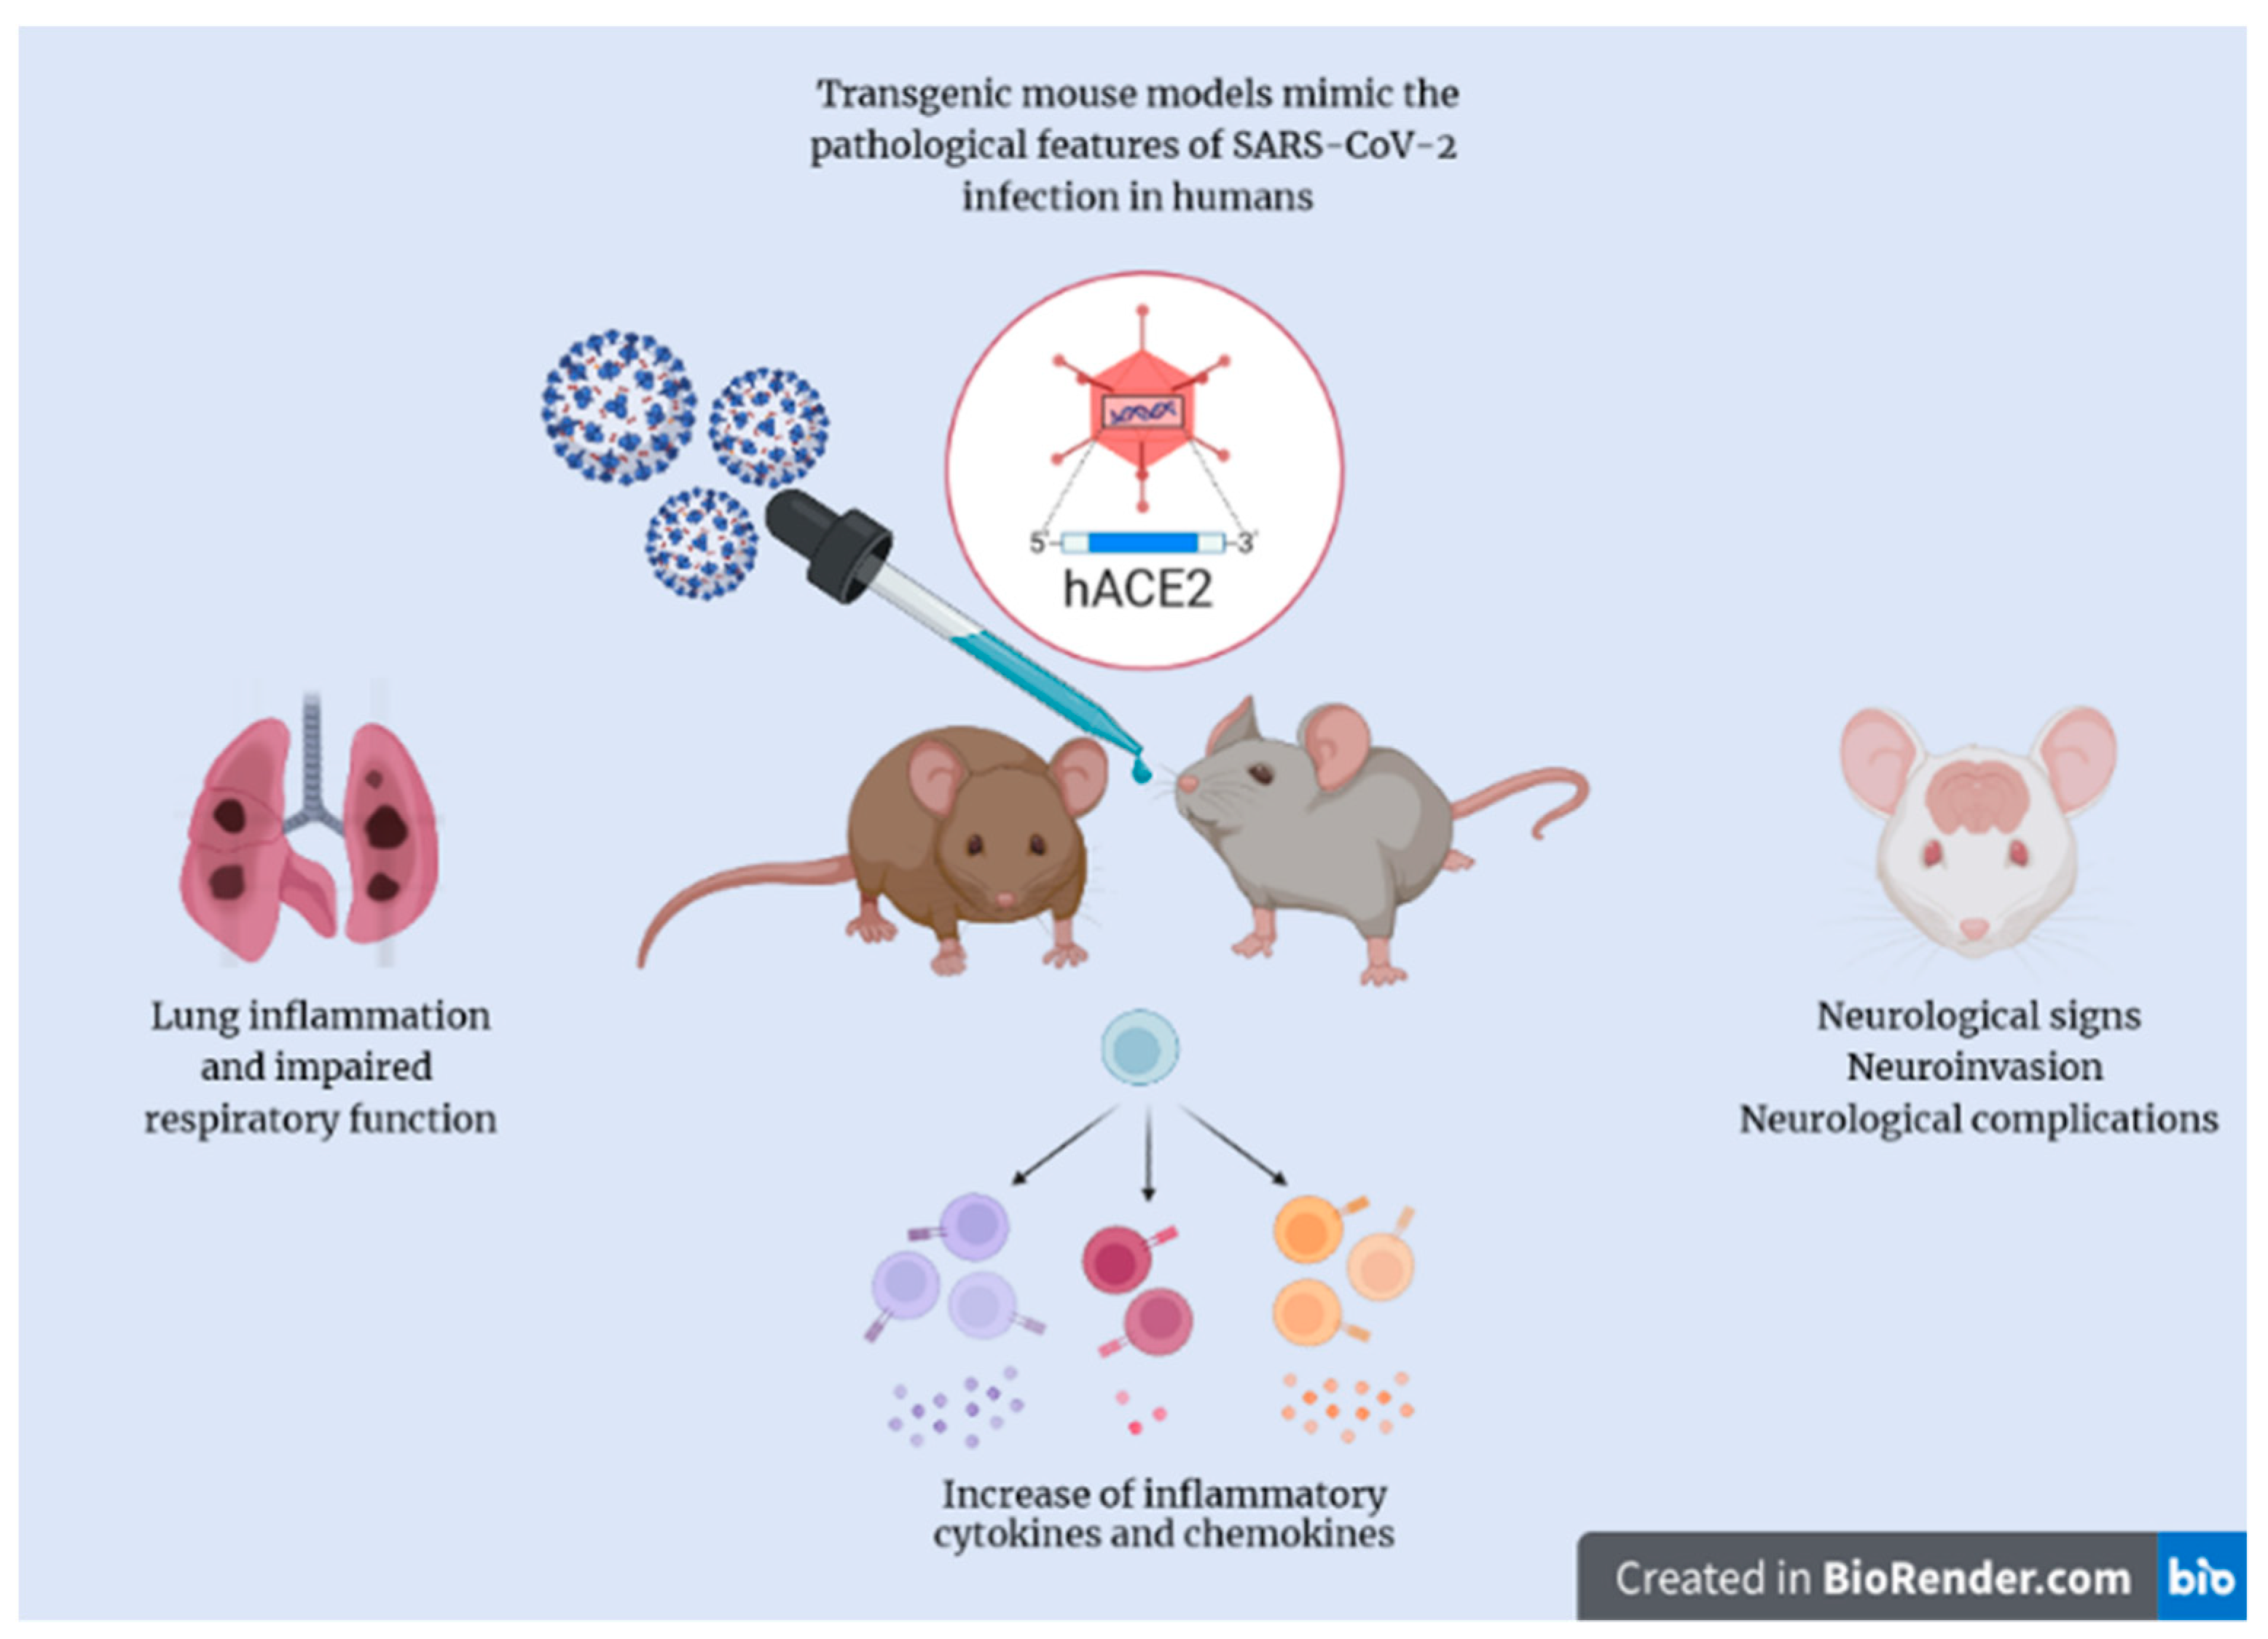 Molecules | Free Full-Text | K18- and CAG-hACE2 Transgenic Mouse Models and SARS-CoV-2: Implications for Neurodegeneration Research